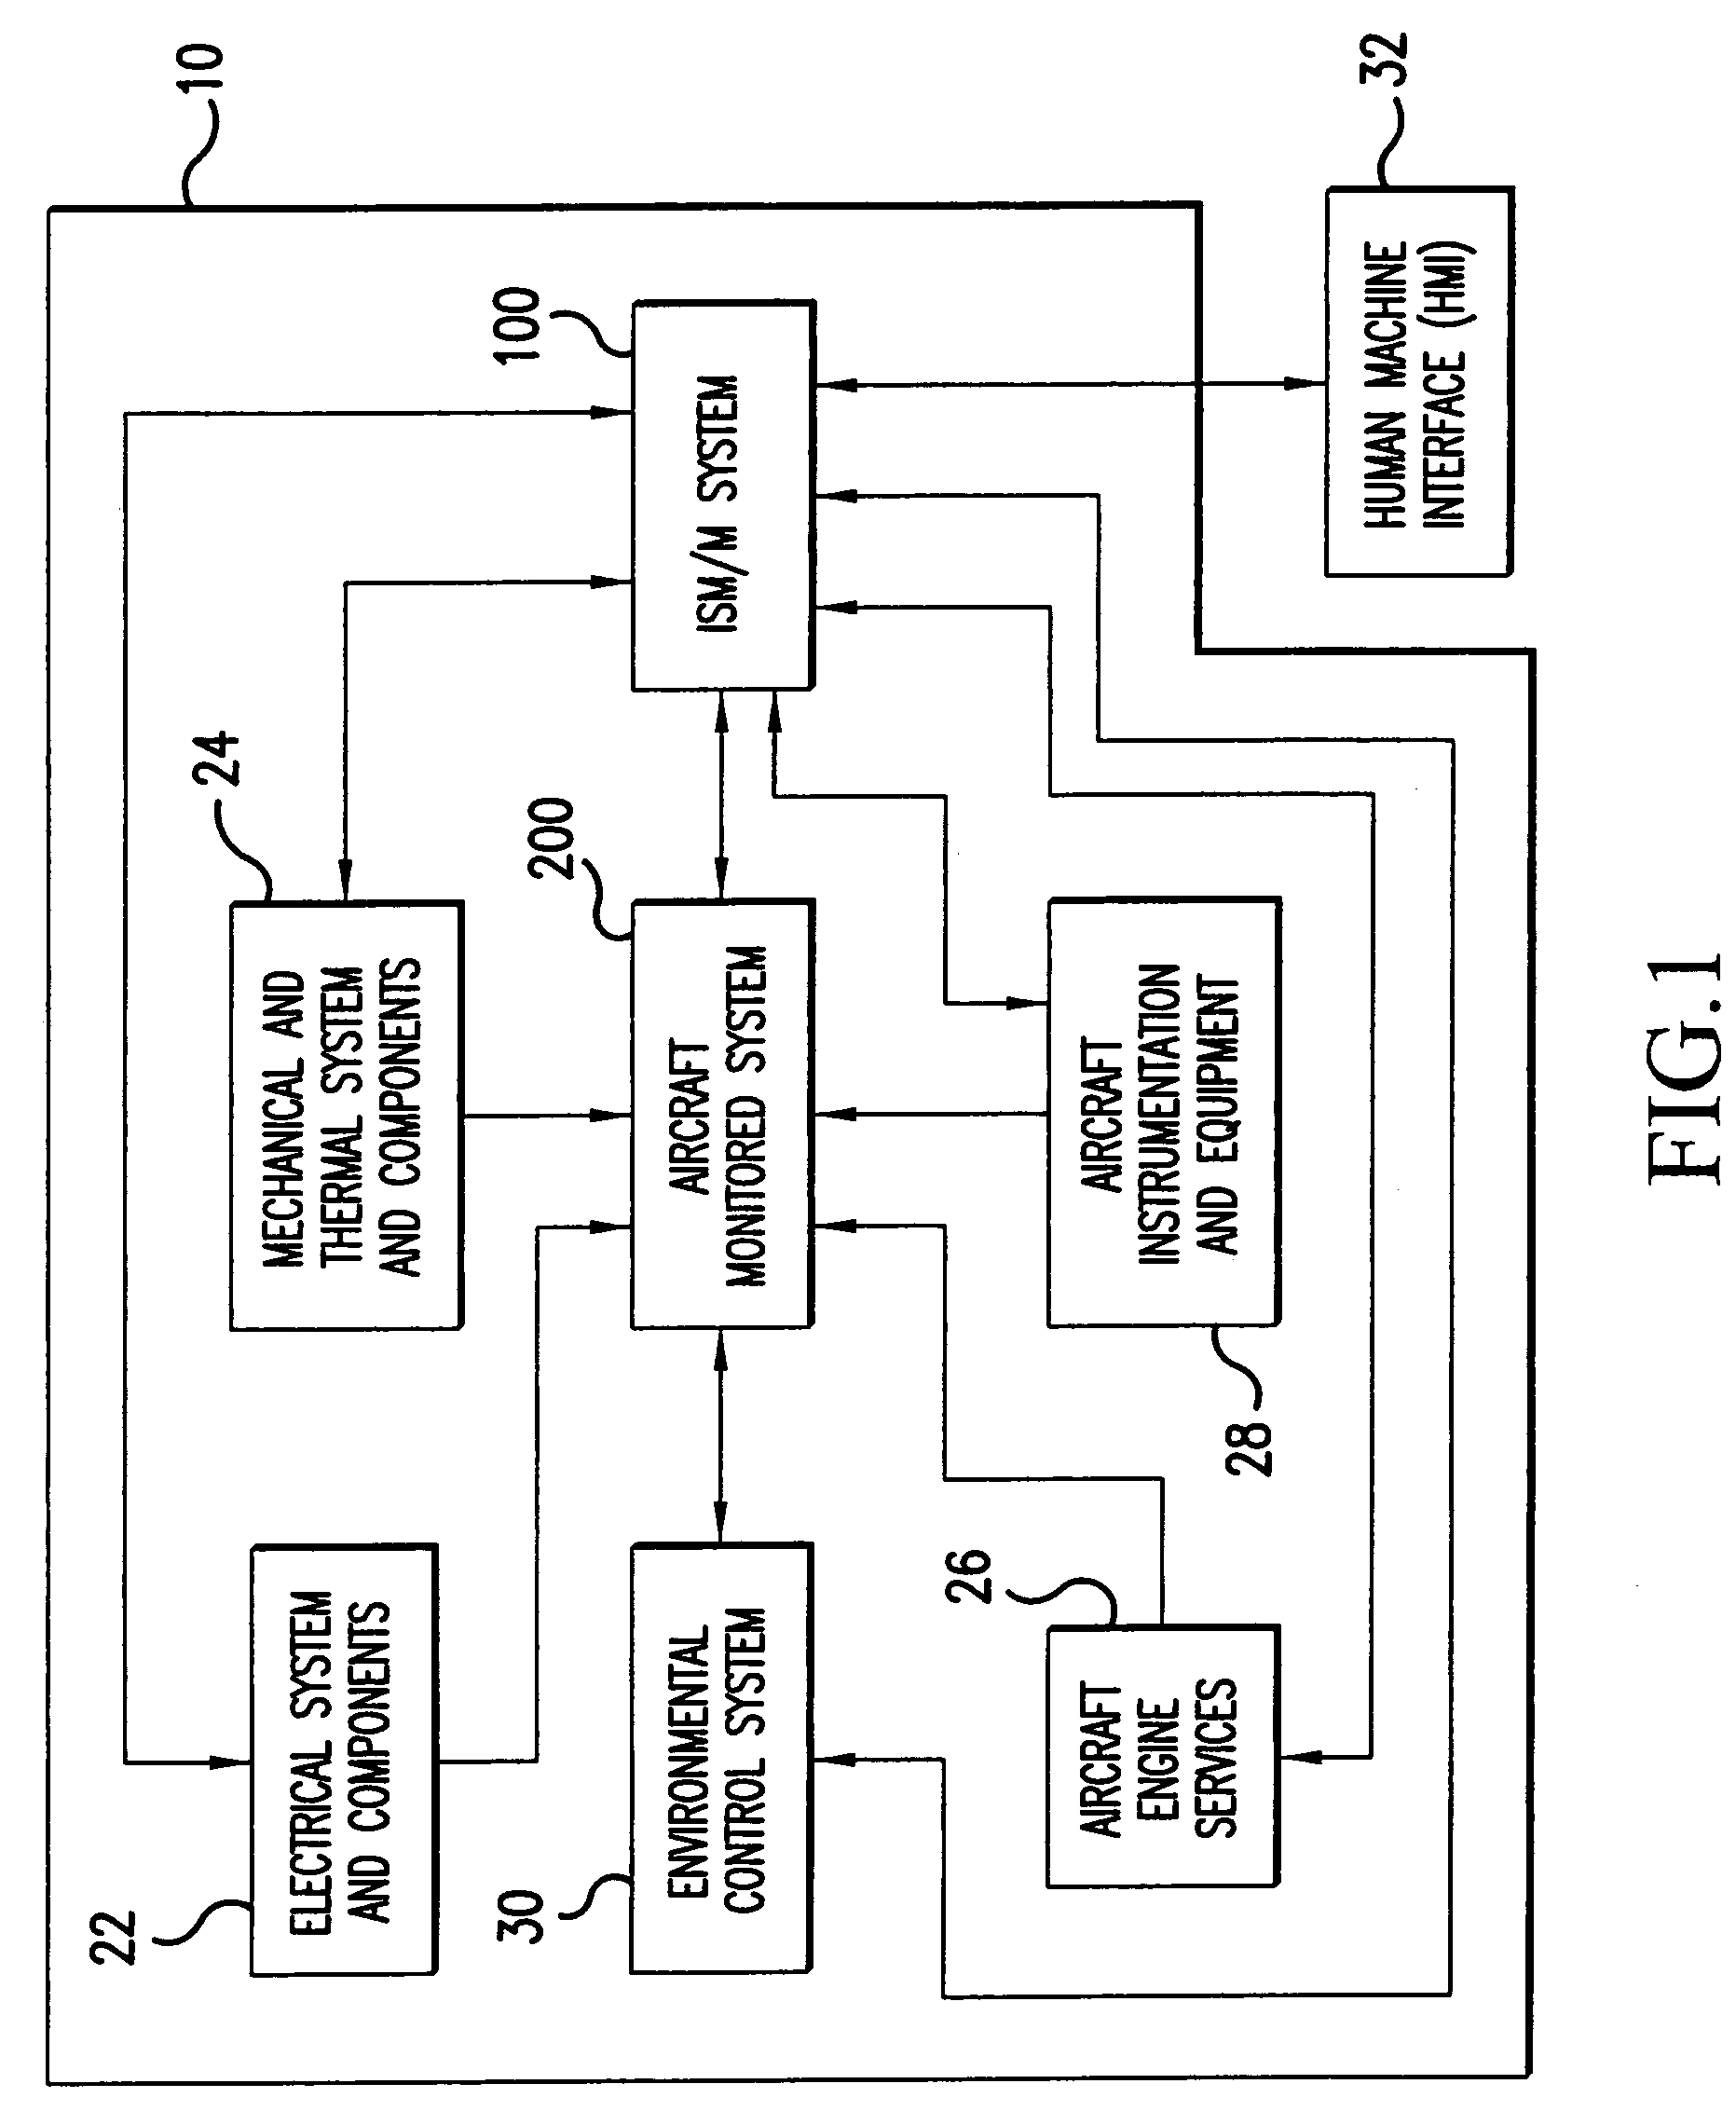 Method and apparatus for system monitoring and maintenance